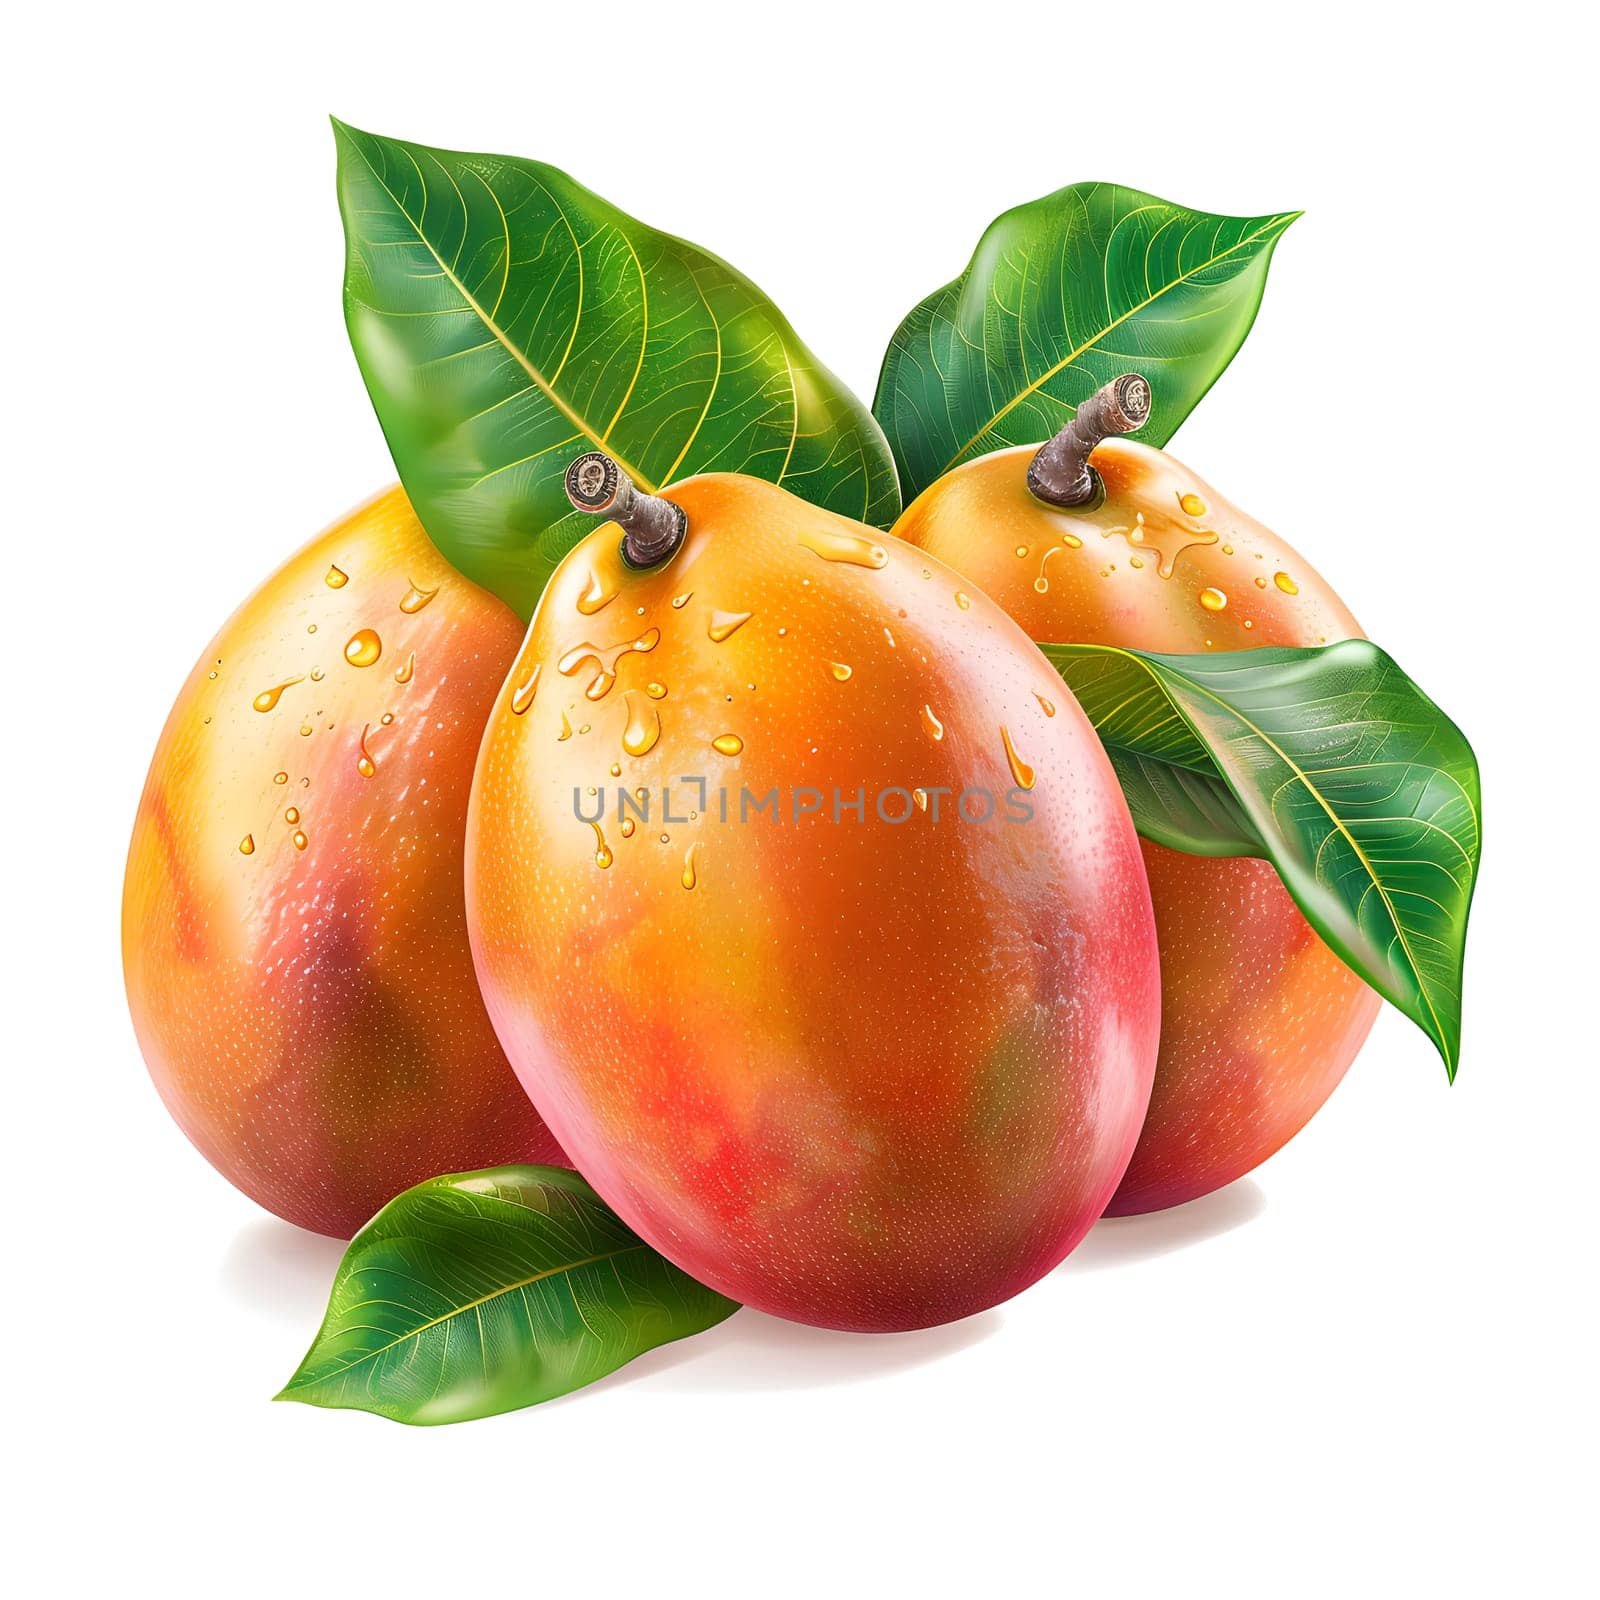 Three ripe mangoes with vibrant green leaves, set on a clean white background. These tropical fruits are essential ingredients in many cuisines and popular as natural, staple foods